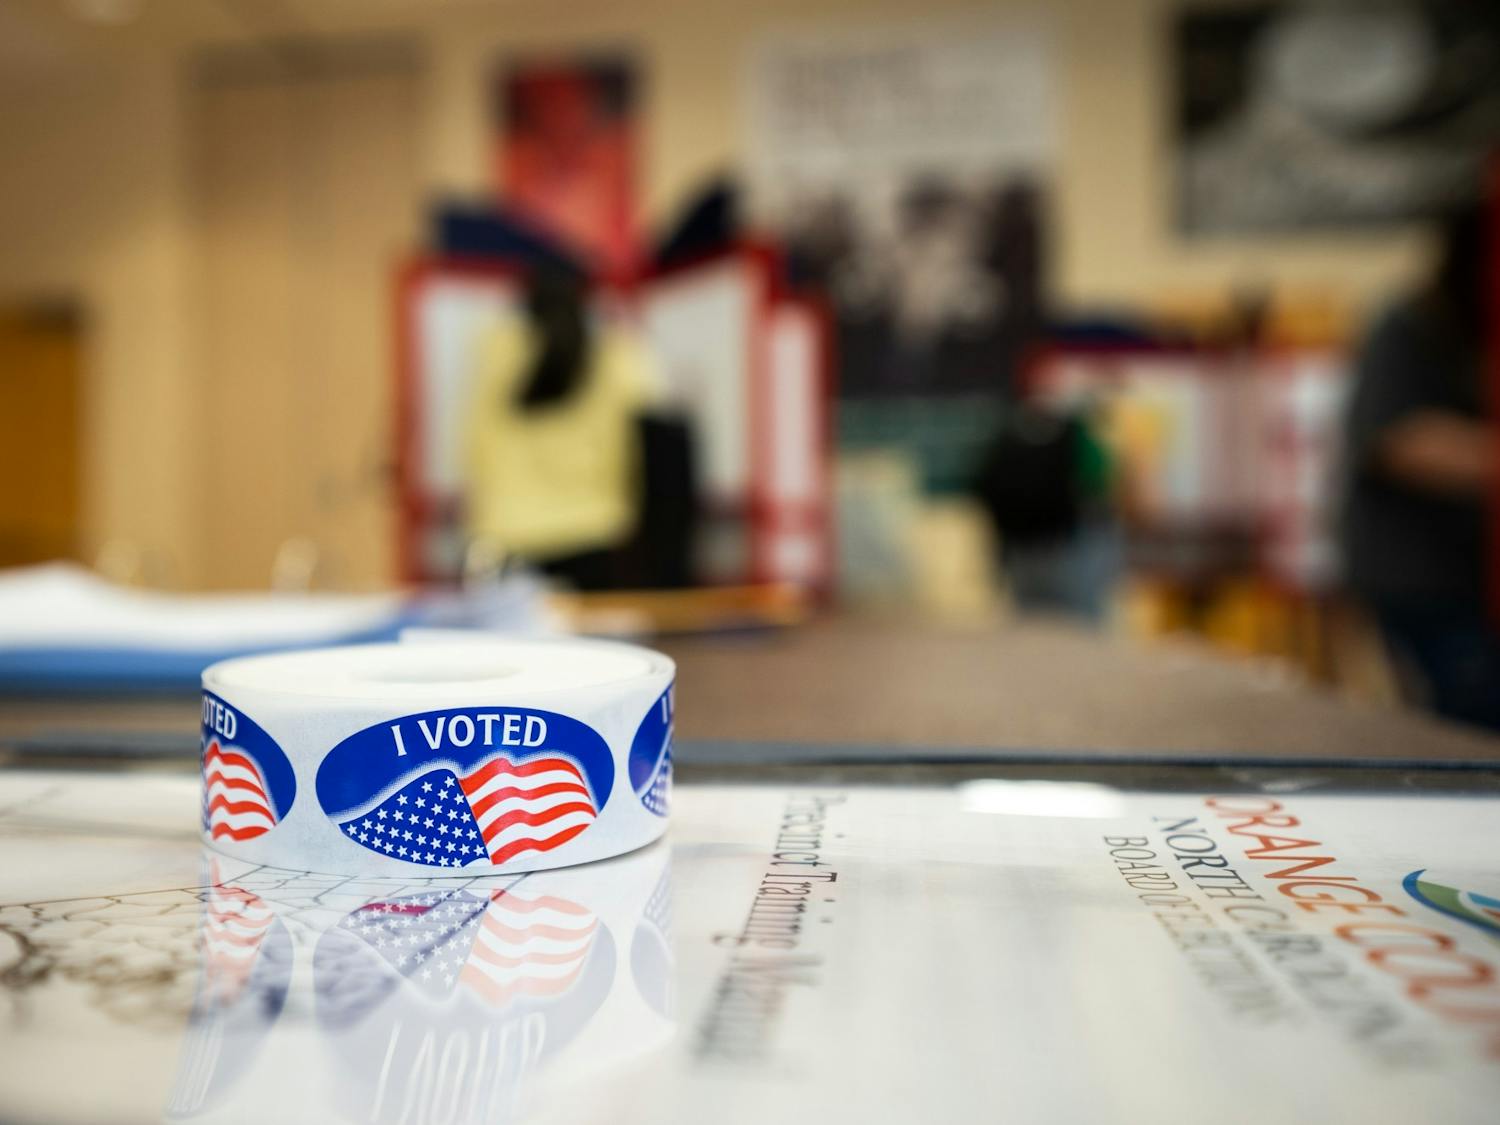 "I voted" stickers were distributed at polling stations located in the Sonja Haynes Stone Center for Black Culture and History during Election Day on Tuesday, Nov. 8, 2022.